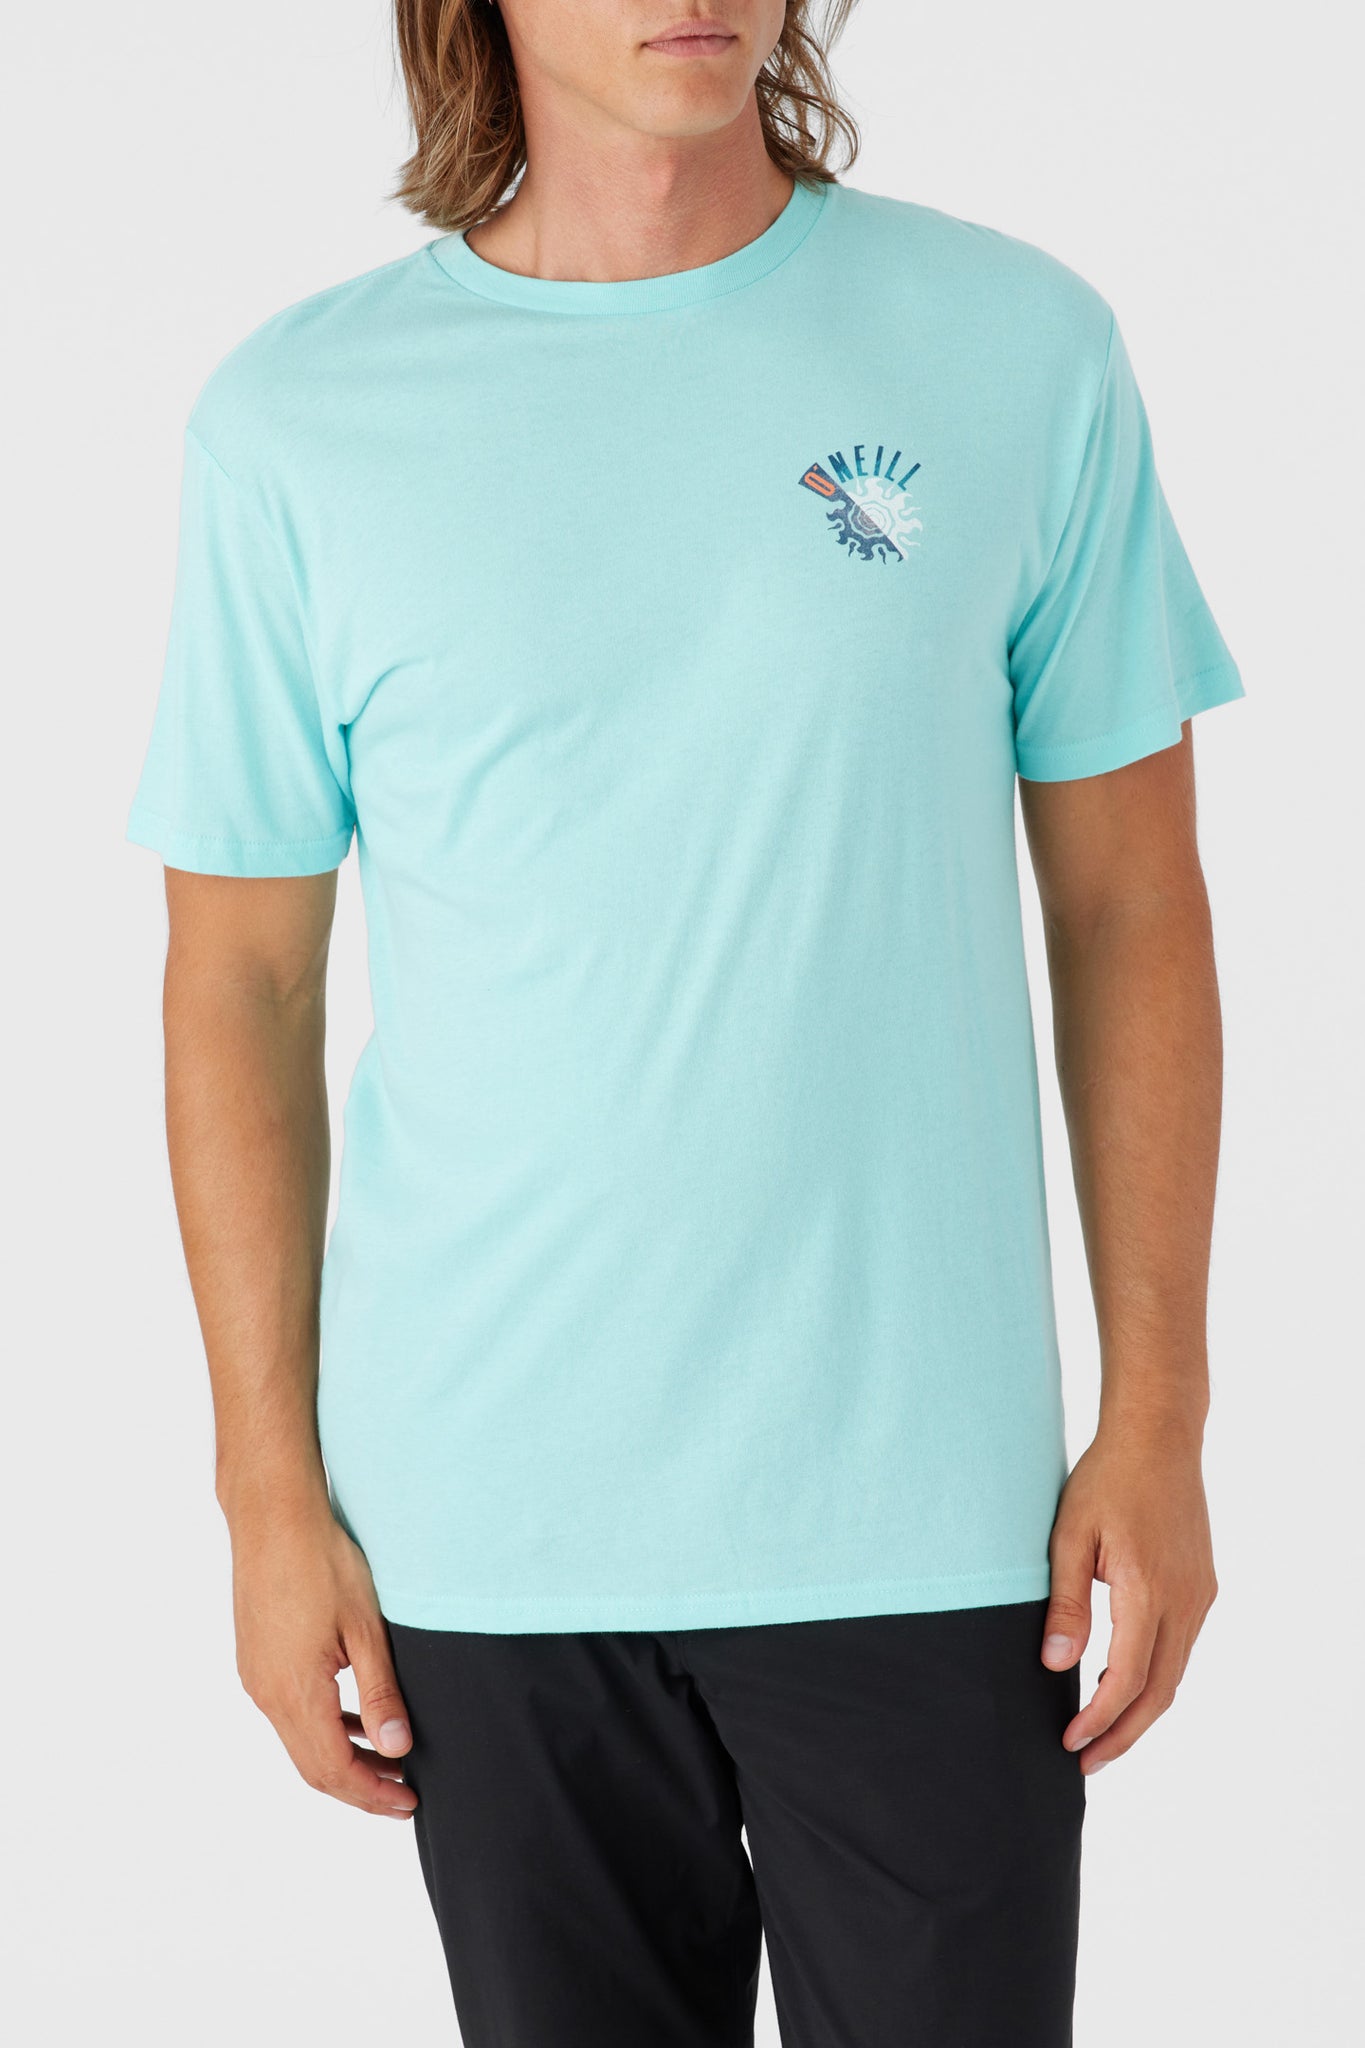 Eclipse Standard Fit Tee - Turquoise | O'Neill